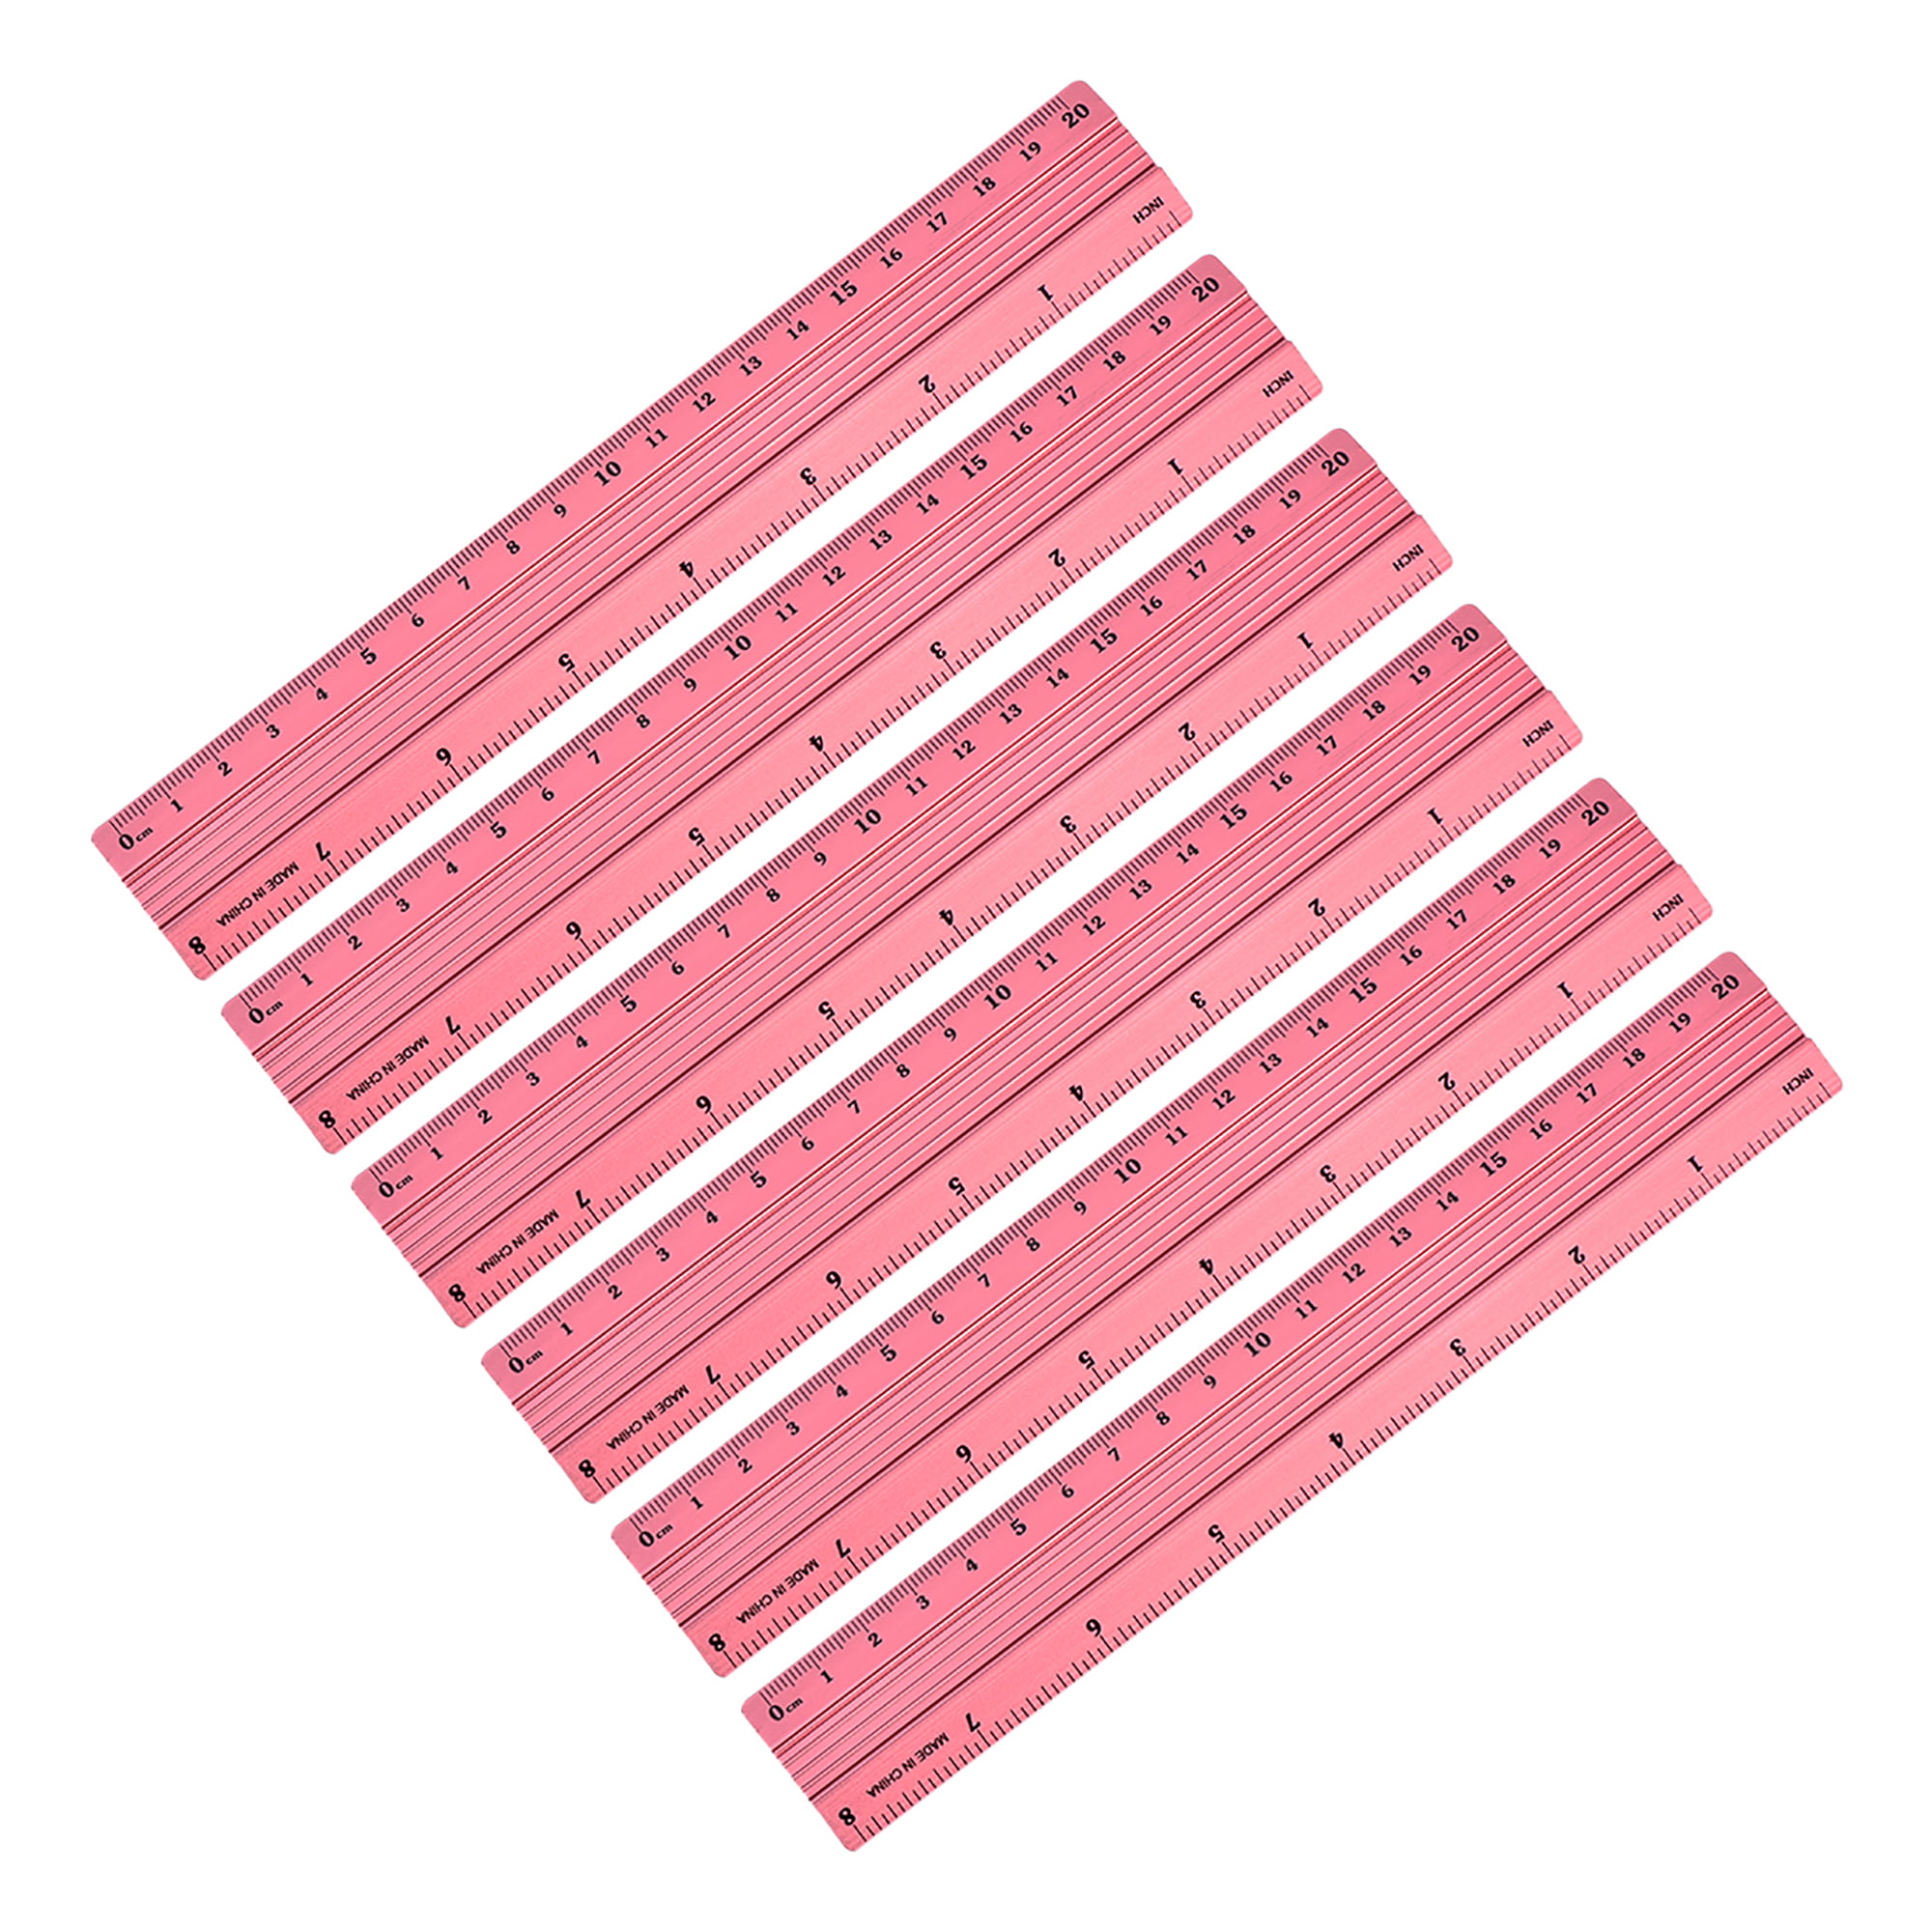 6 Inch Architectural Scale Ruler Red Bevel Edge Straight Ruler uxcell Aluminium Rulers Professional Measuring Ruler for Blueprint Draft